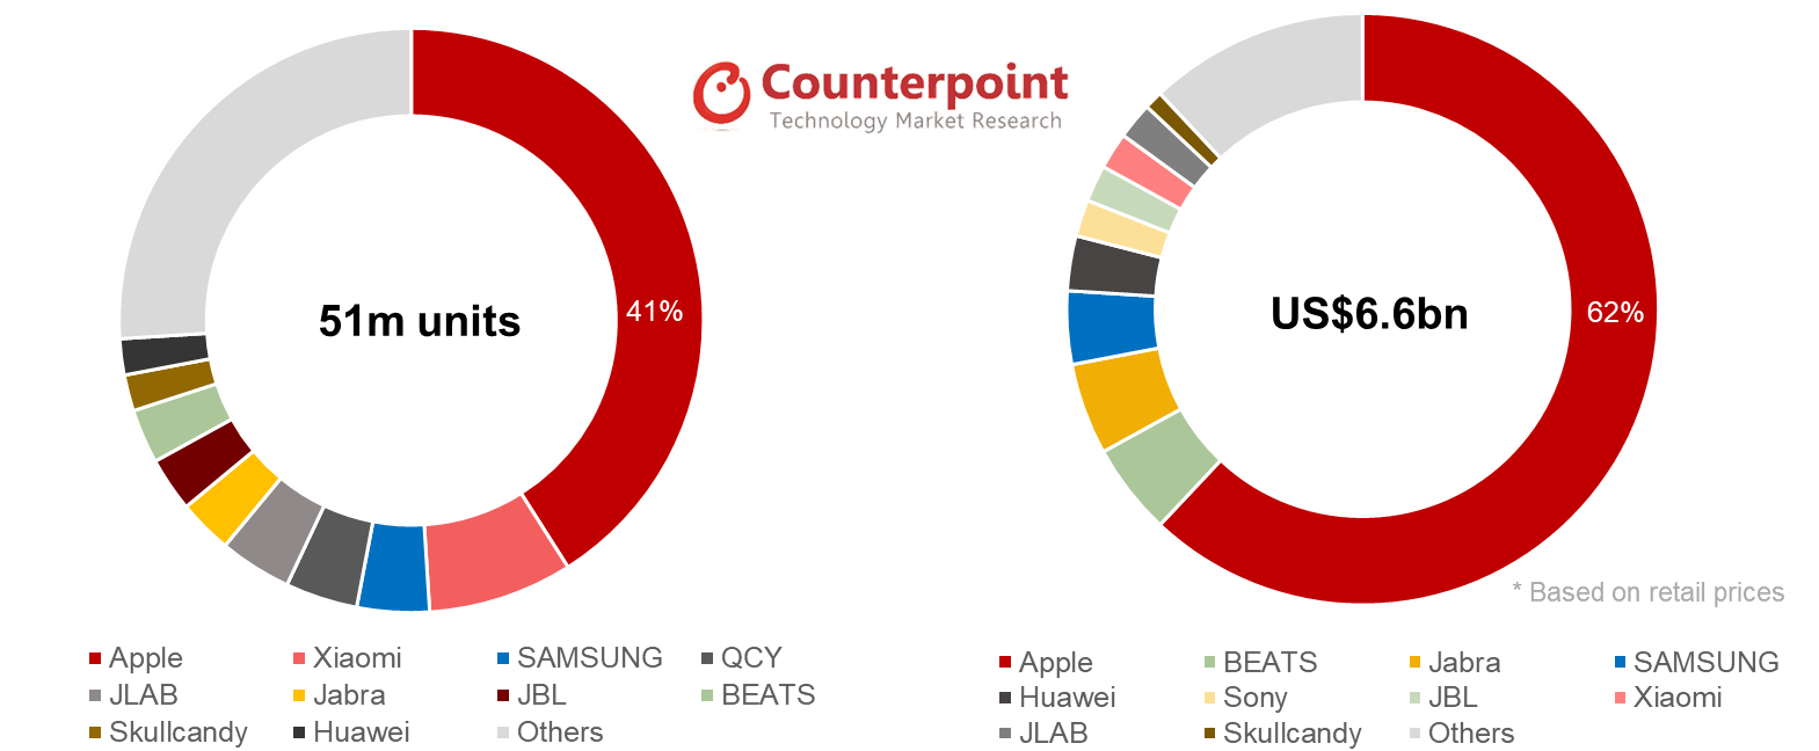 Counterpoint True Wireless Hearables Market Share by Brand - 4Q19